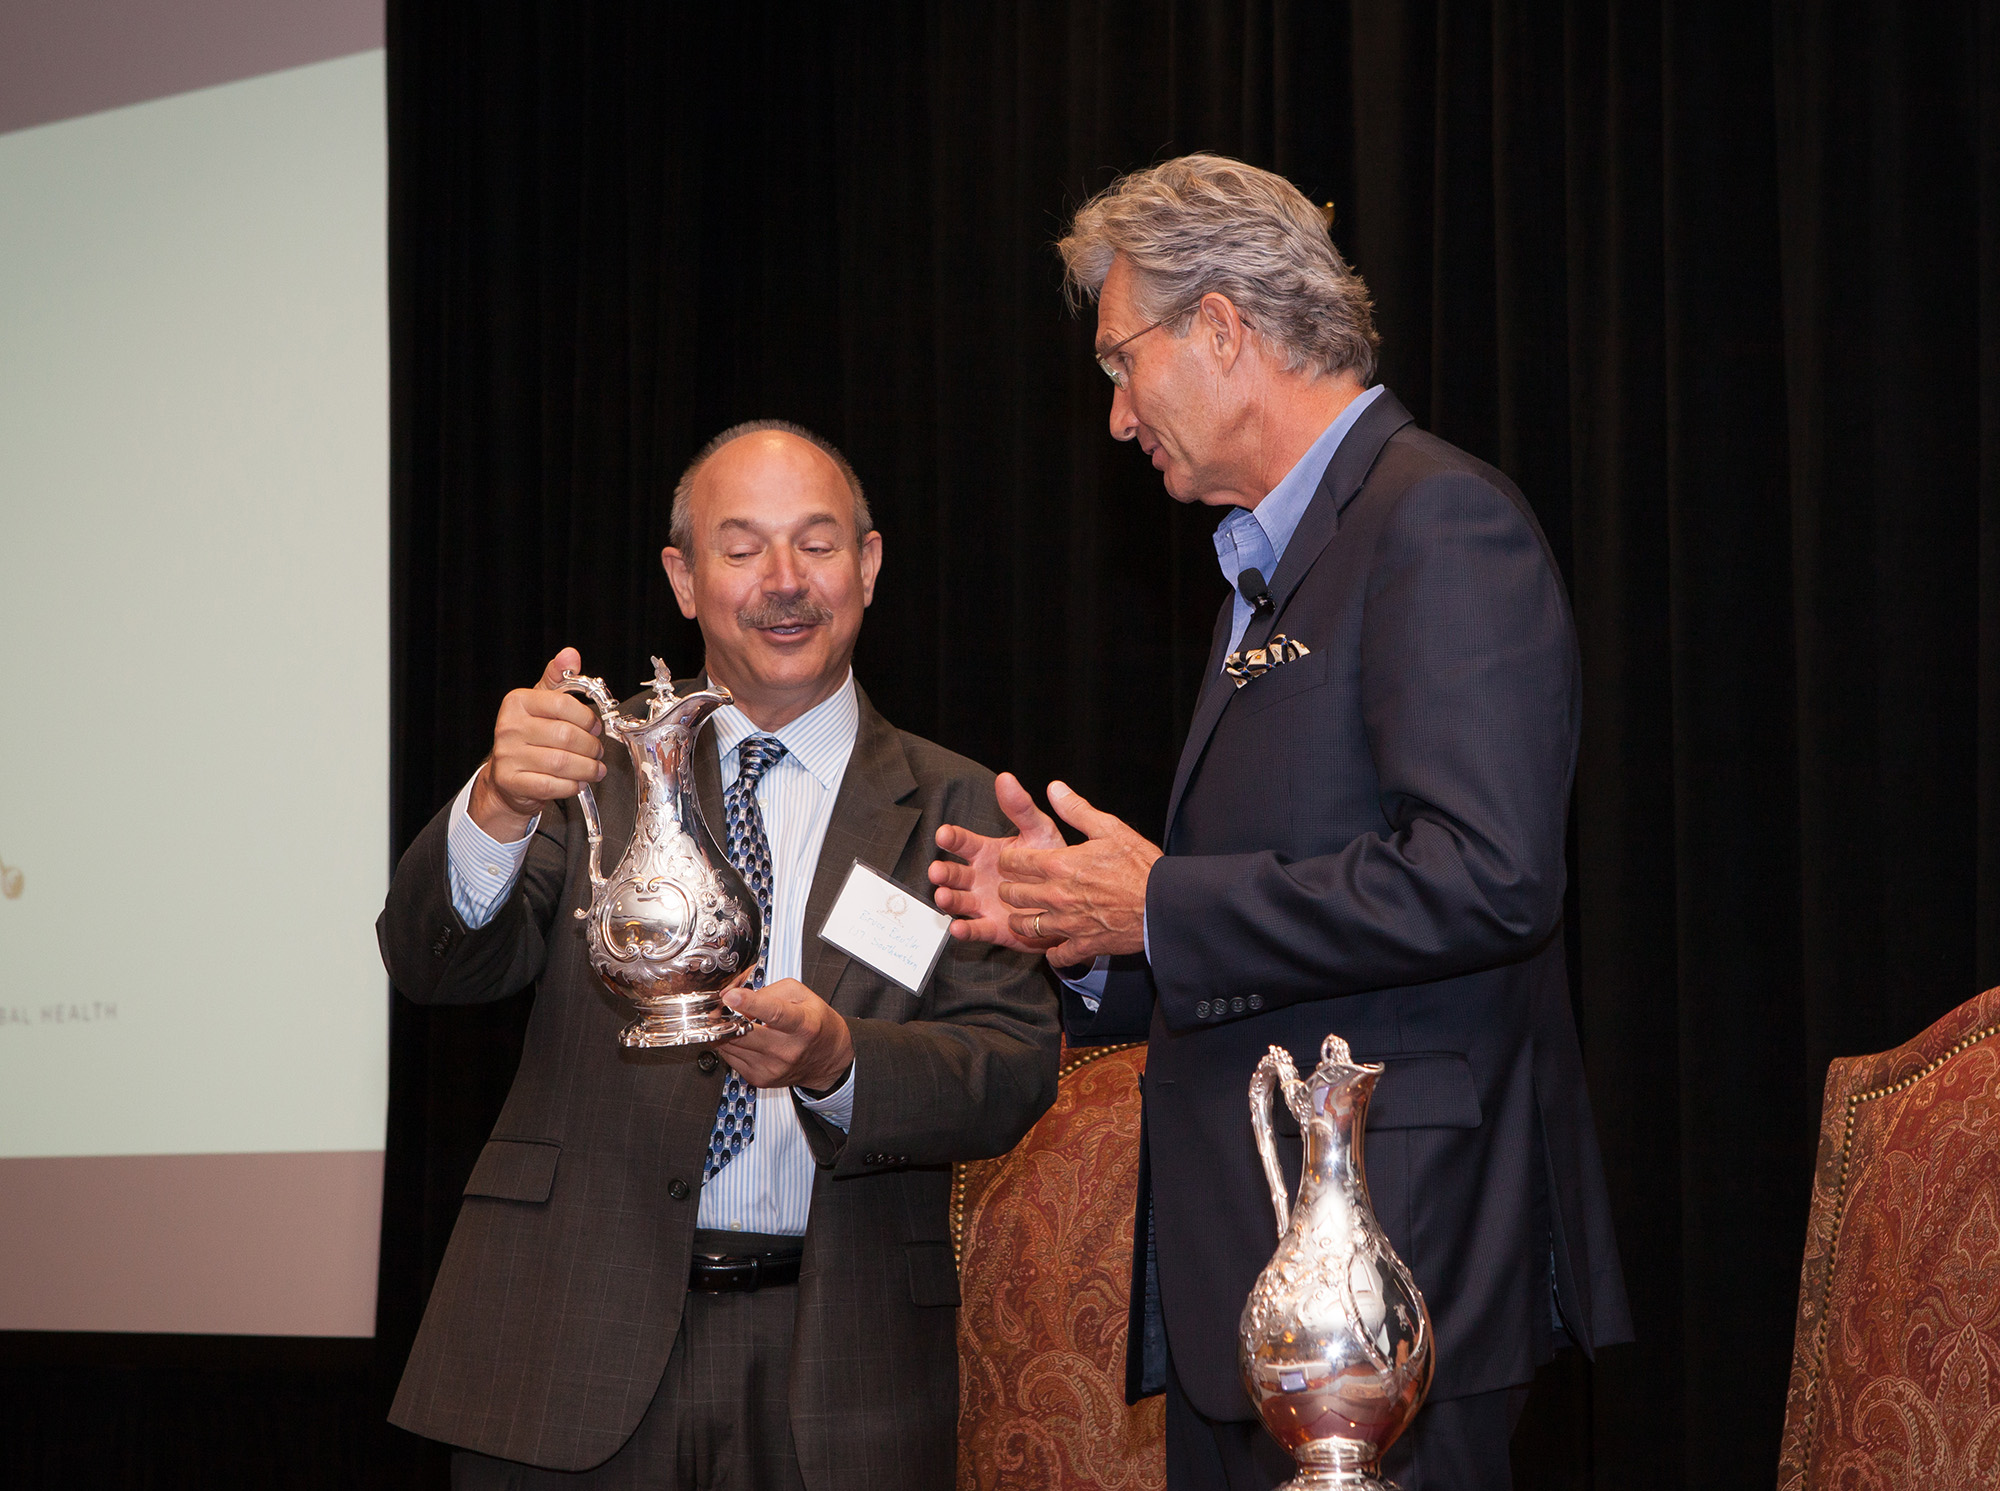 Dr. Bruce A. Buetler receiving the 2015 Lindahl Lecture